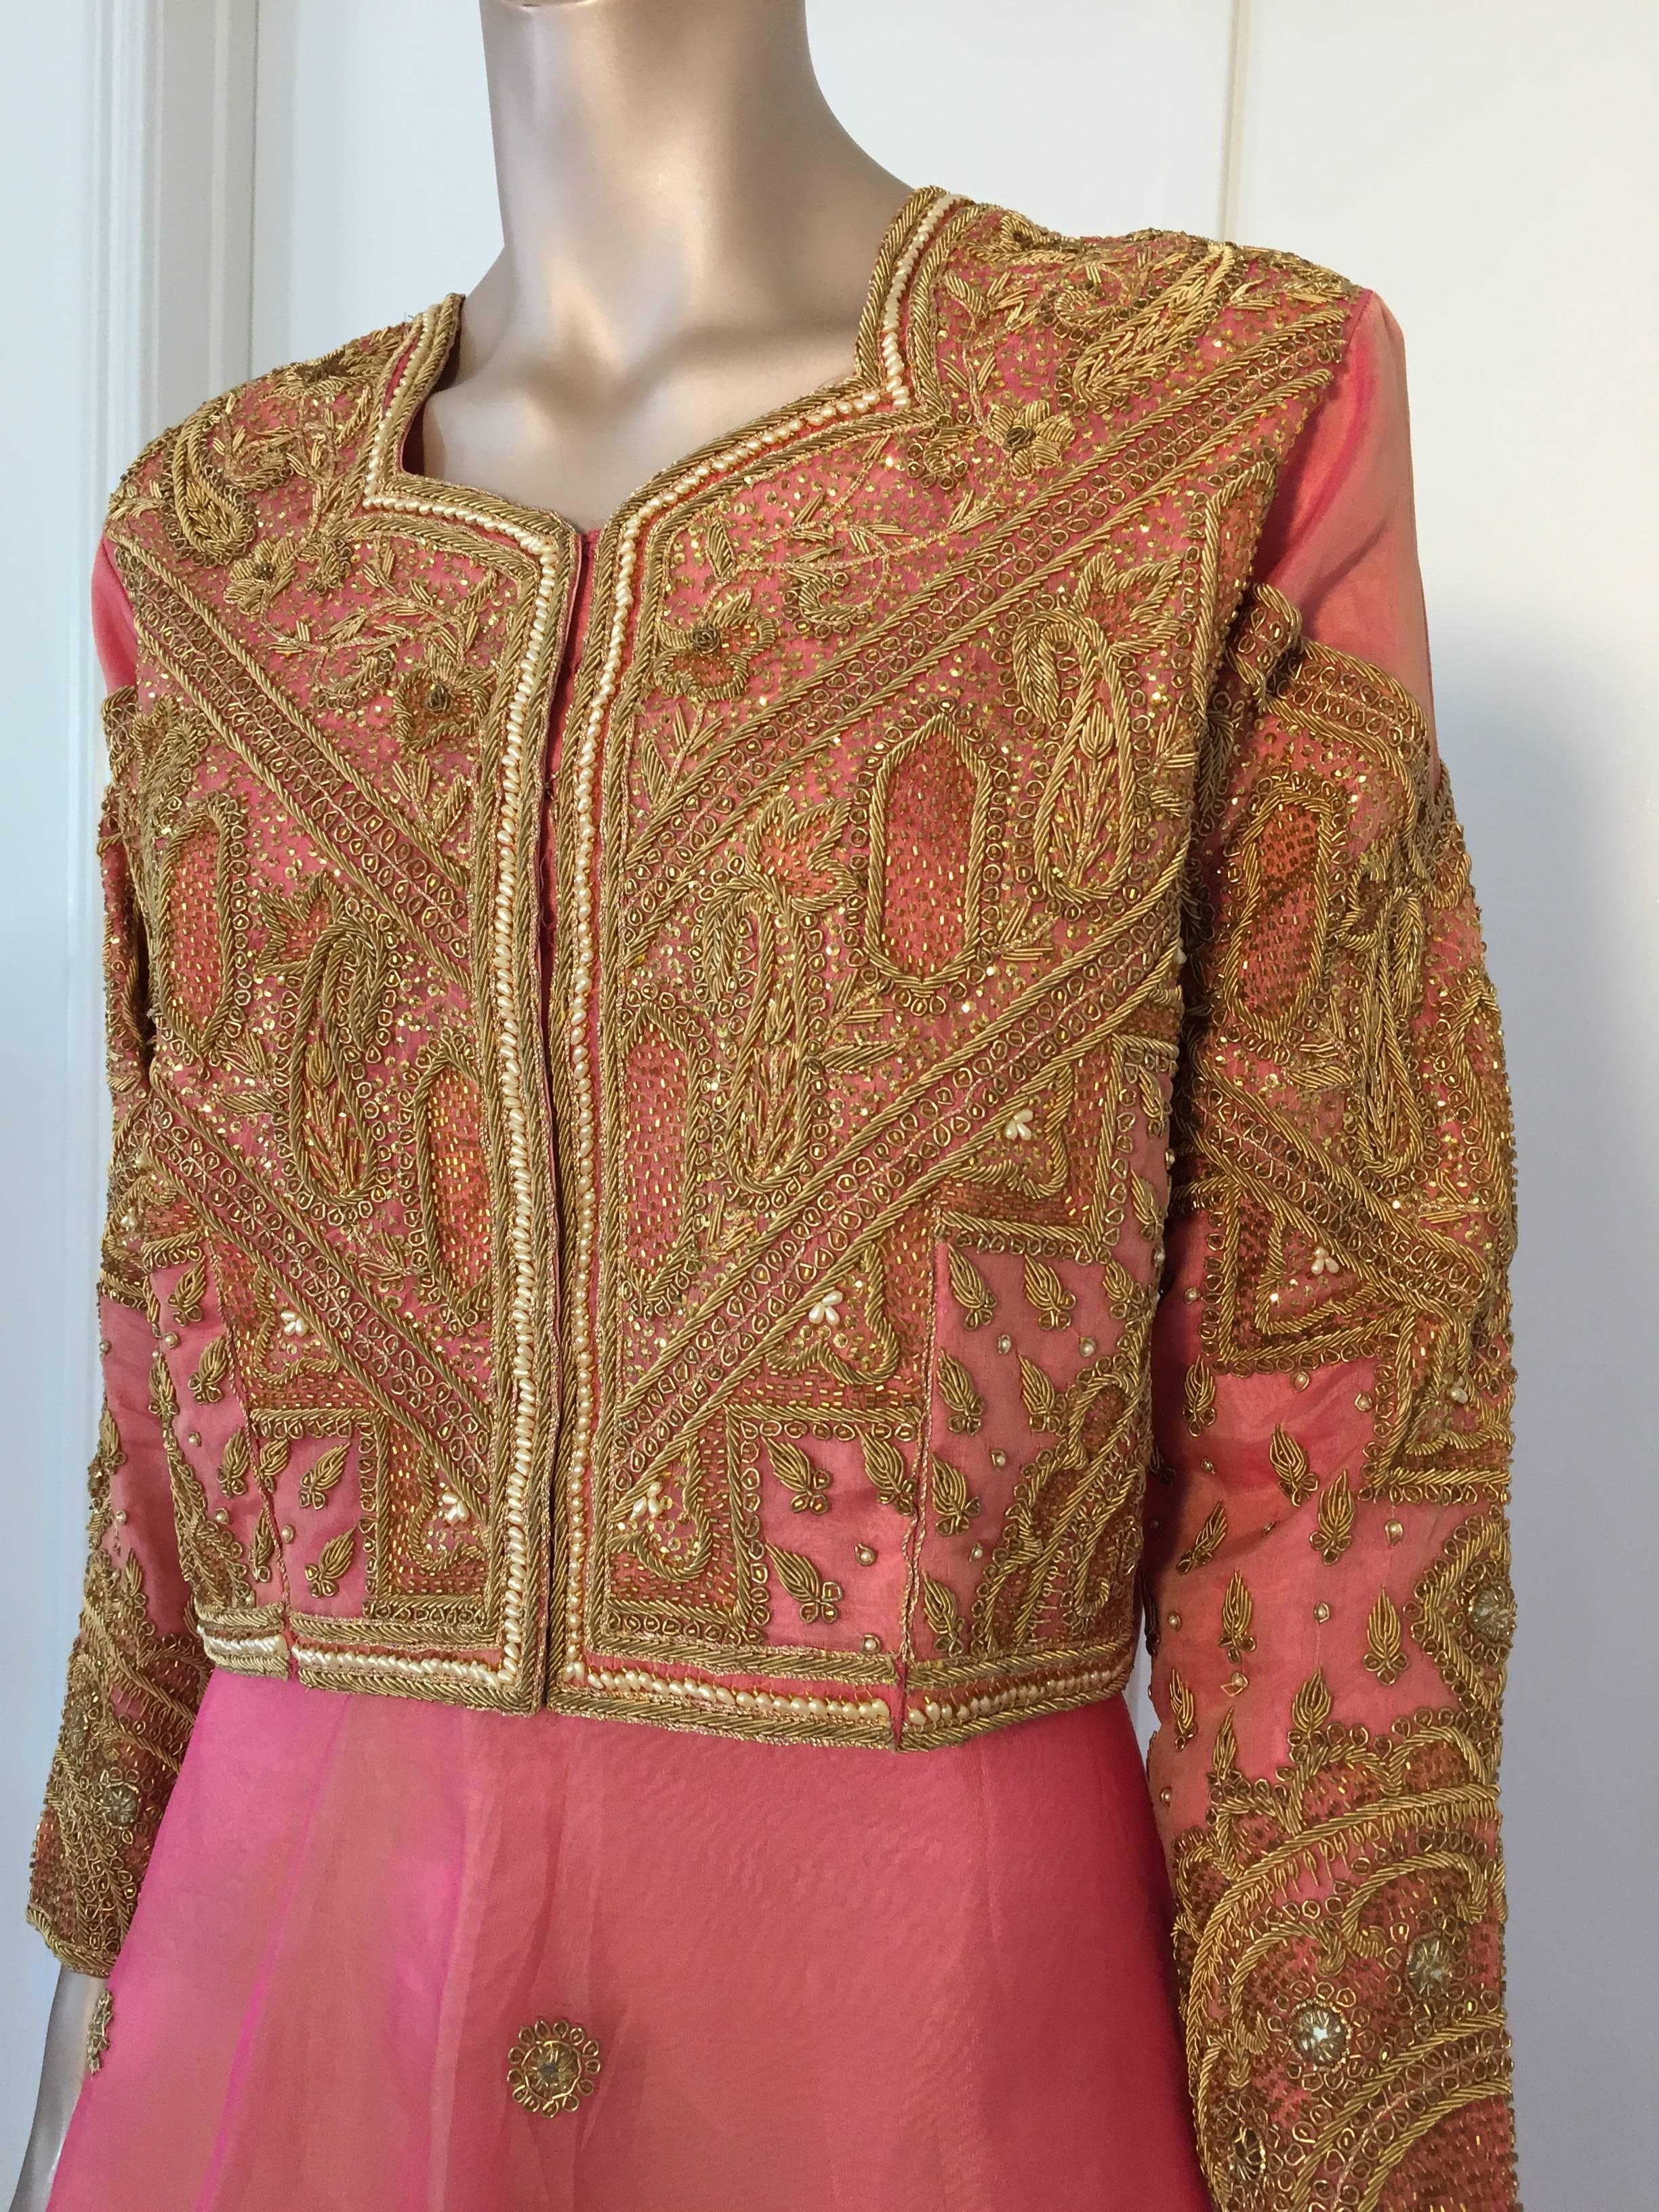 Embroidered Pink and Gold Silk Evening 3 Pieces Gown Vest and Skirt and Shawl In Good Condition For Sale In North Hollywood, CA